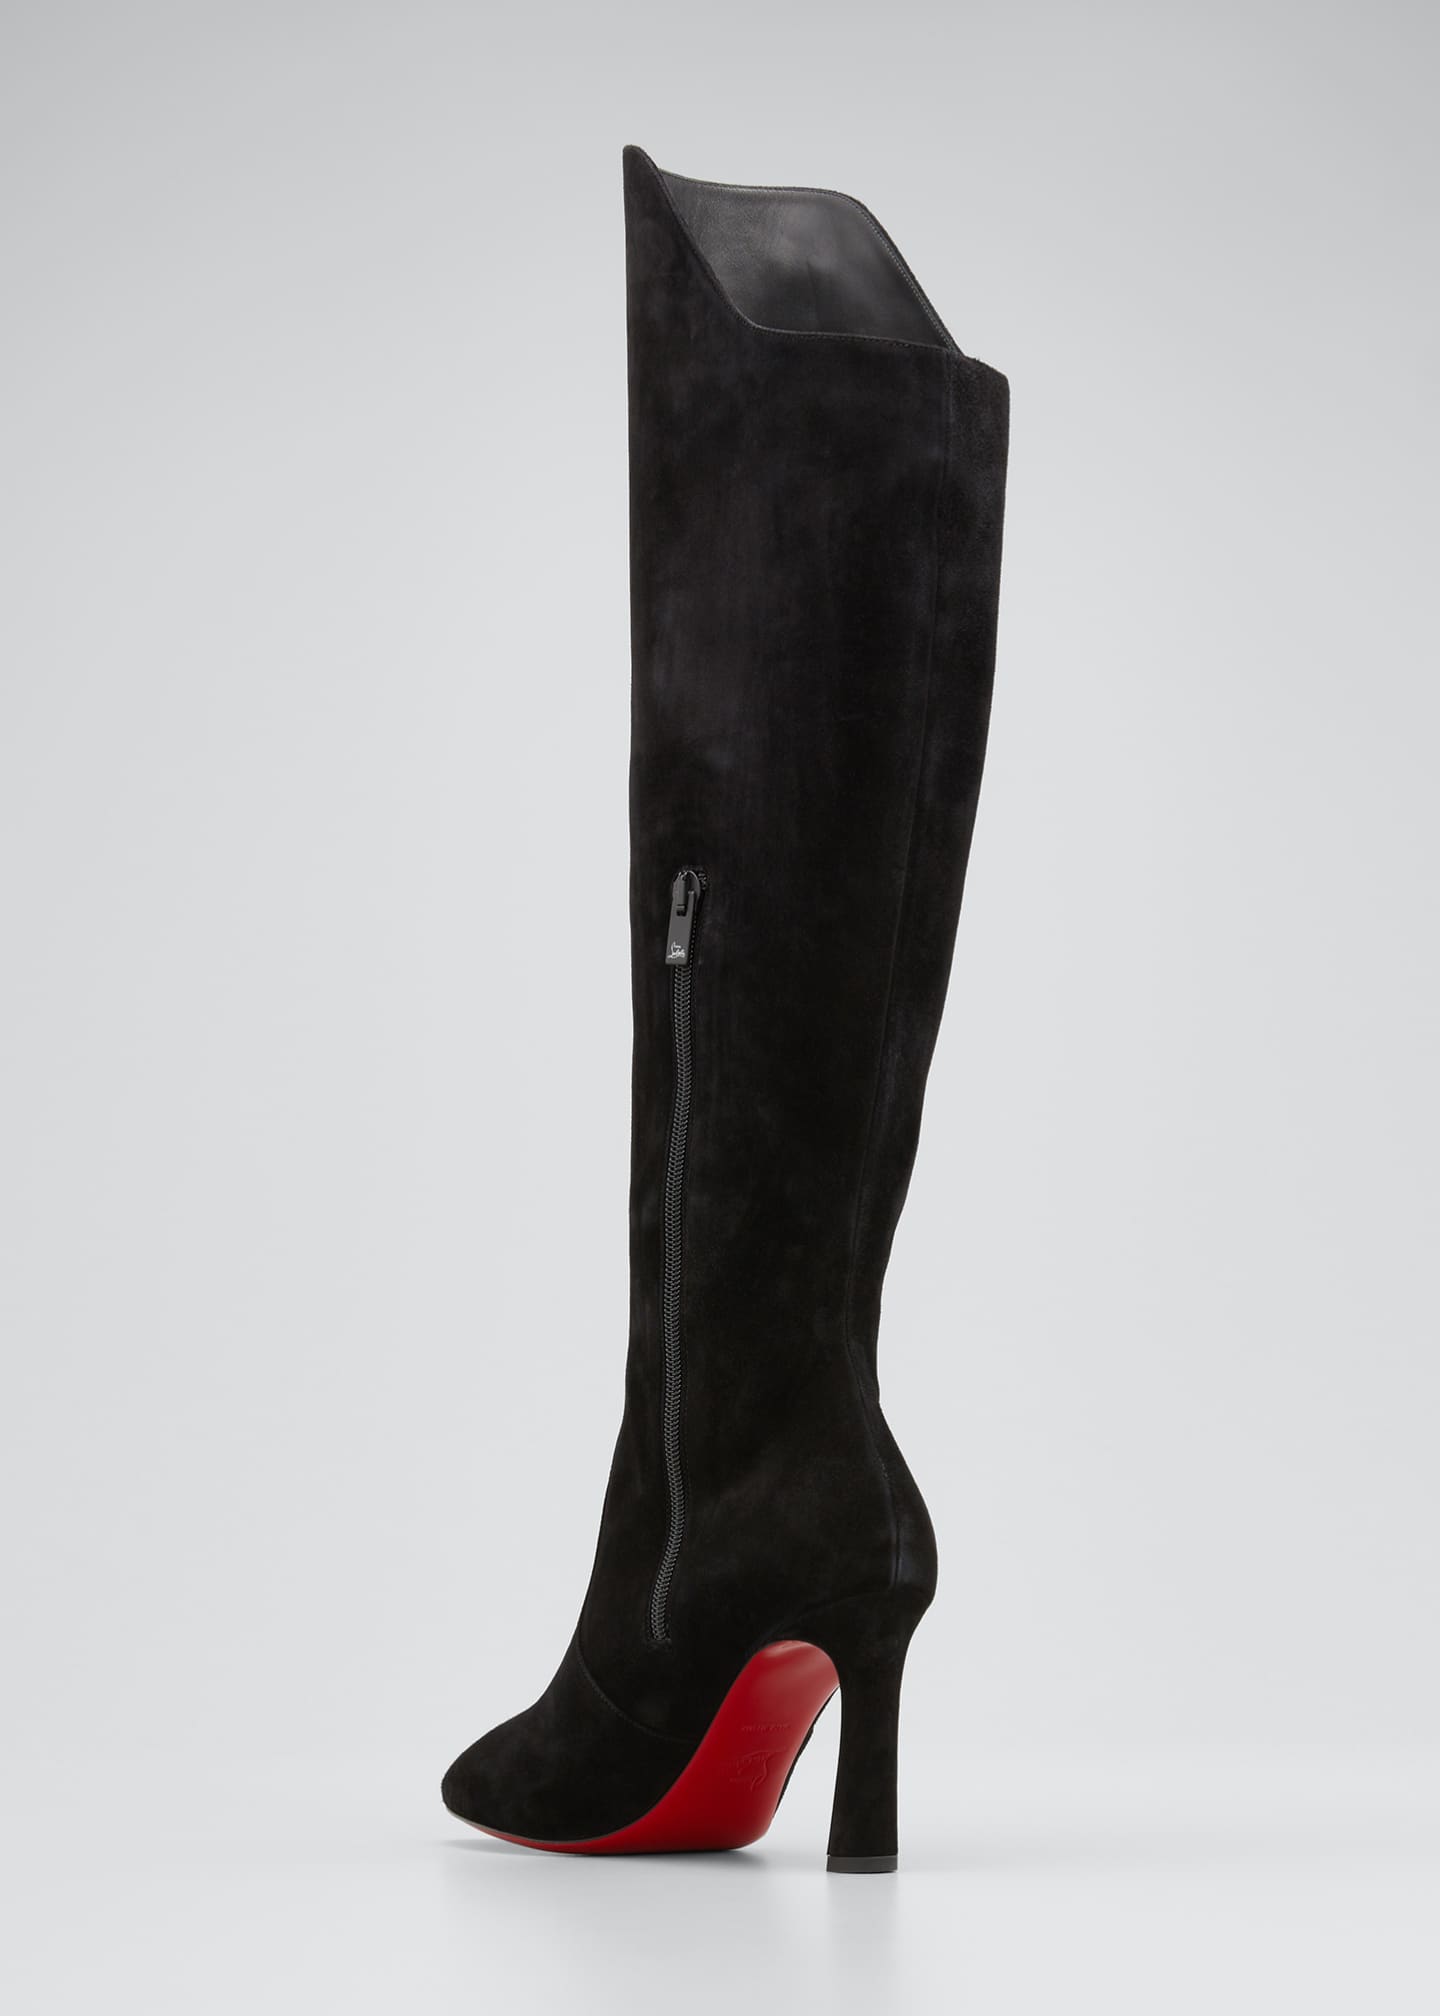 Christian Louboutin Eleonor Tall Suede Red Sole Boots - Bergdorf Goodman